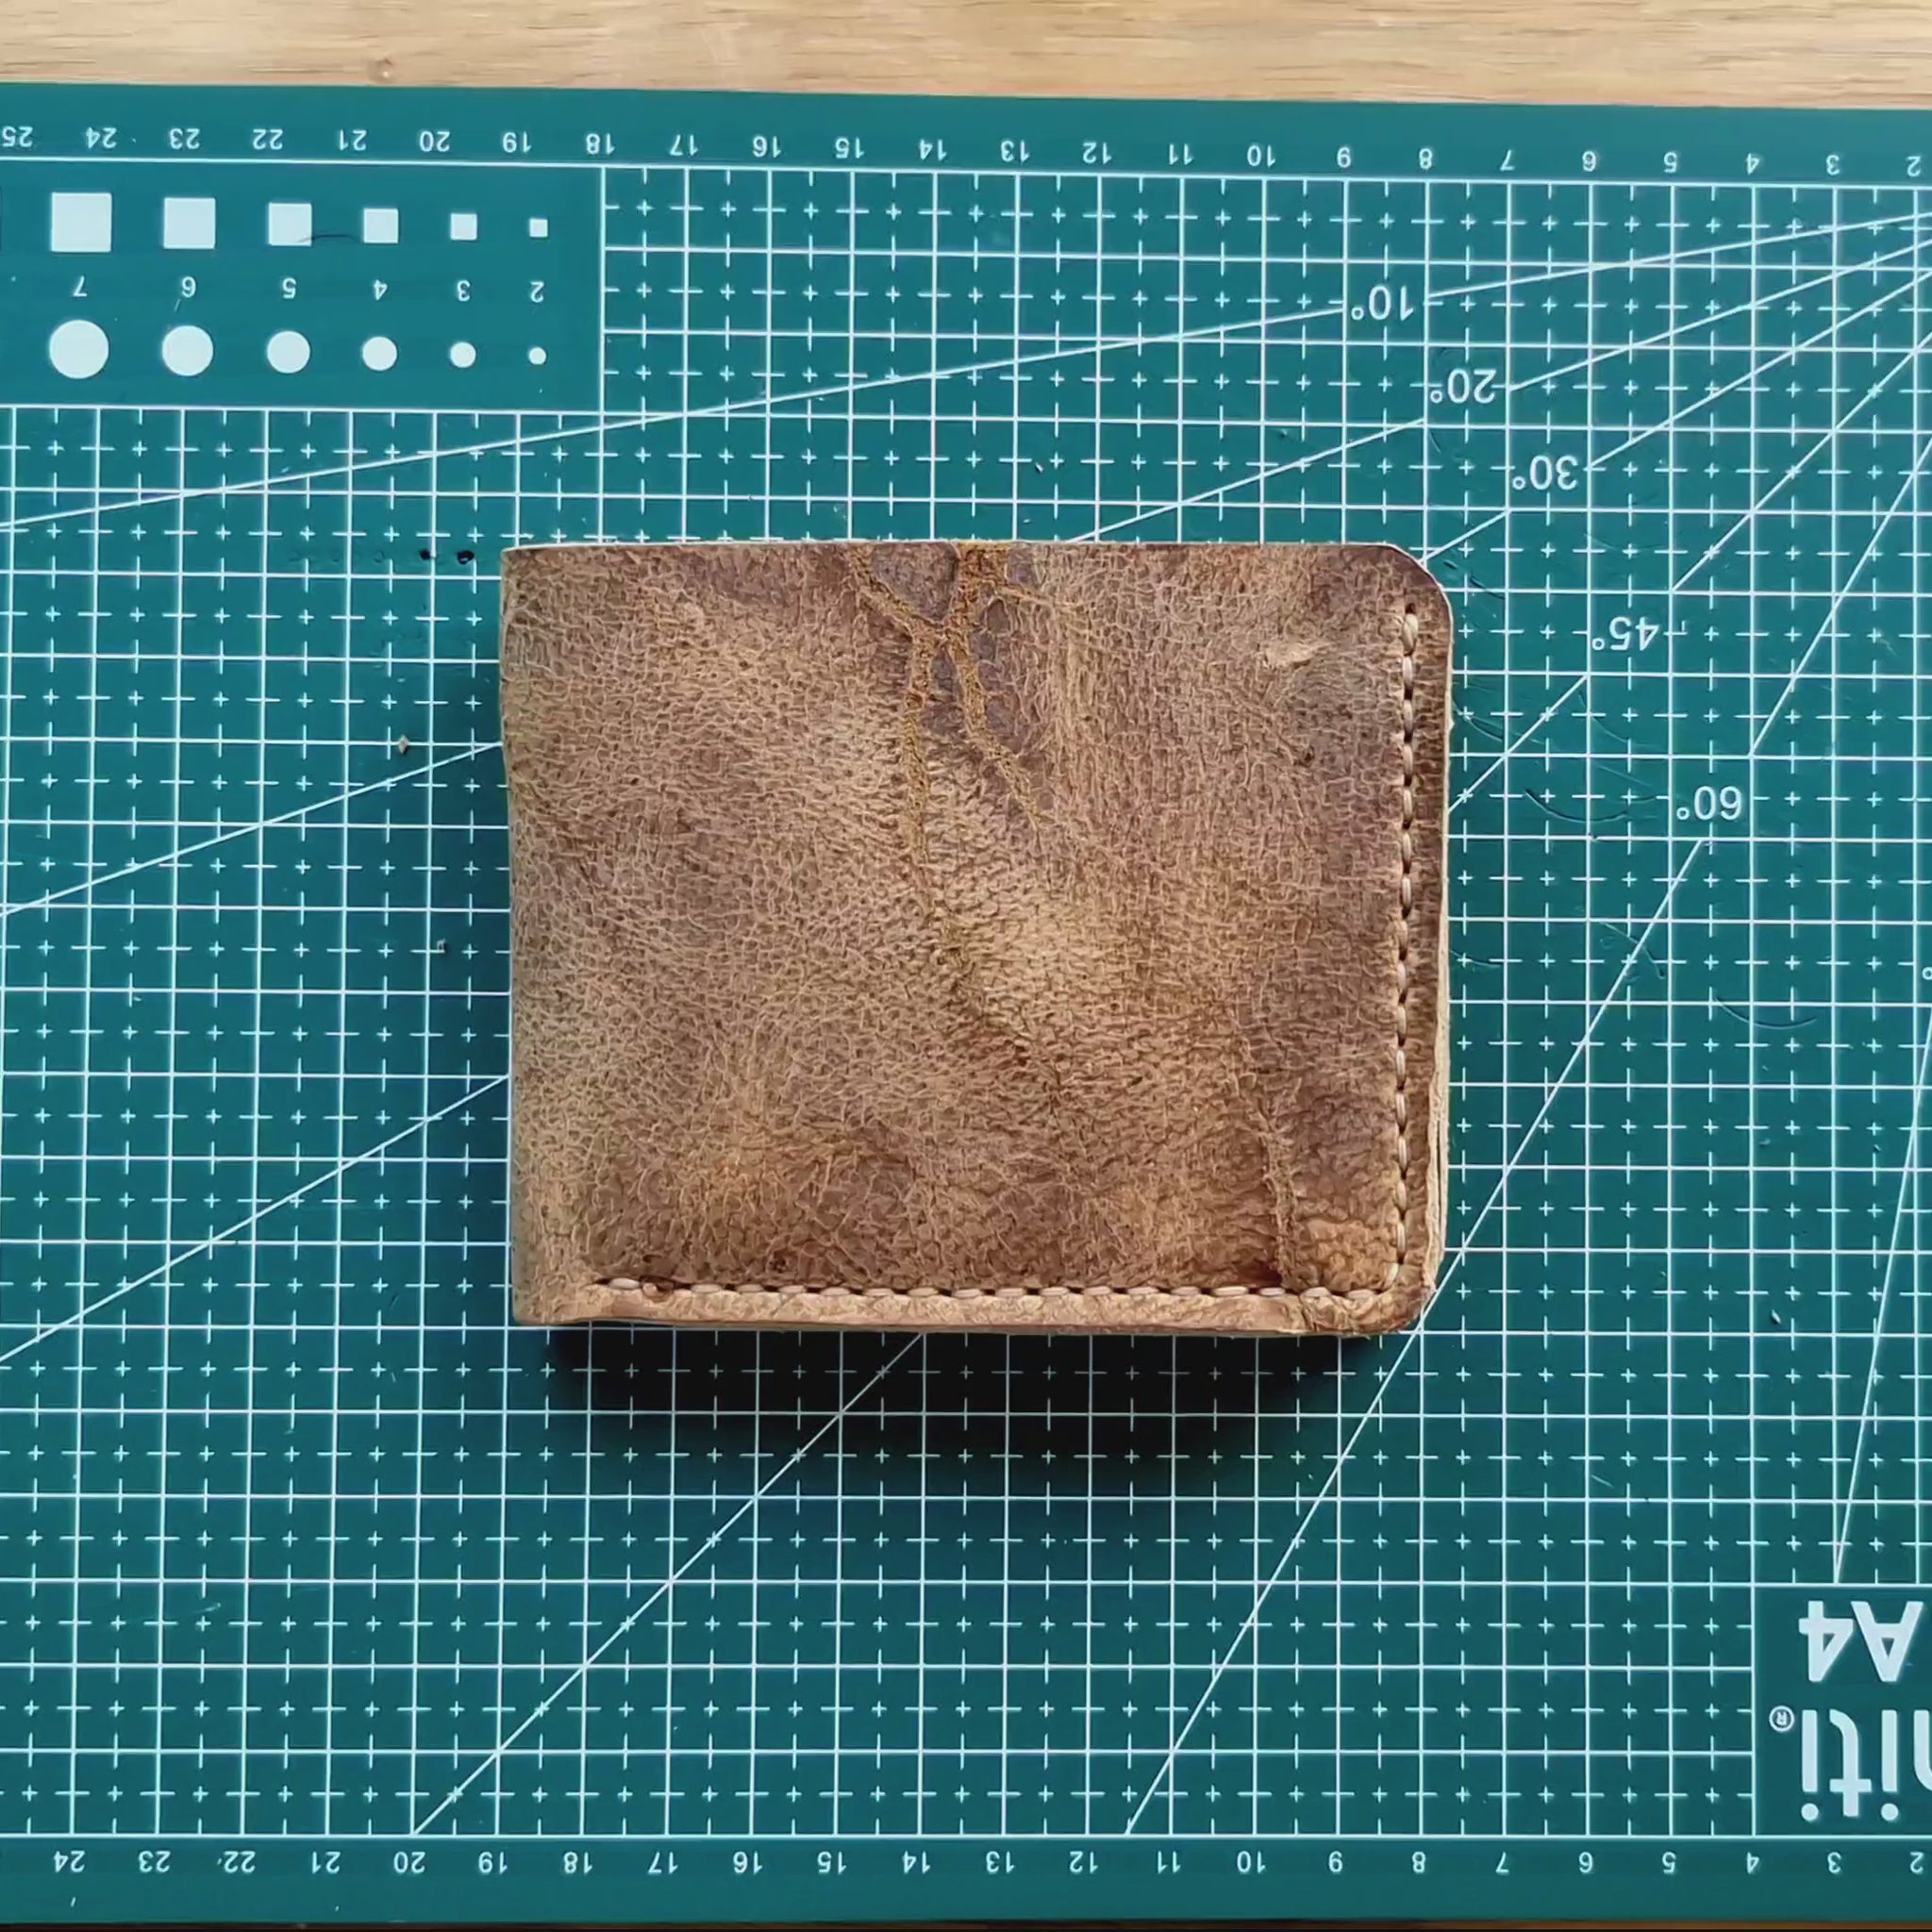 No. 2 Frontiersman Leather Bifold Wallet, C F Stead & Co Desert Kudu Leather, Opening Video